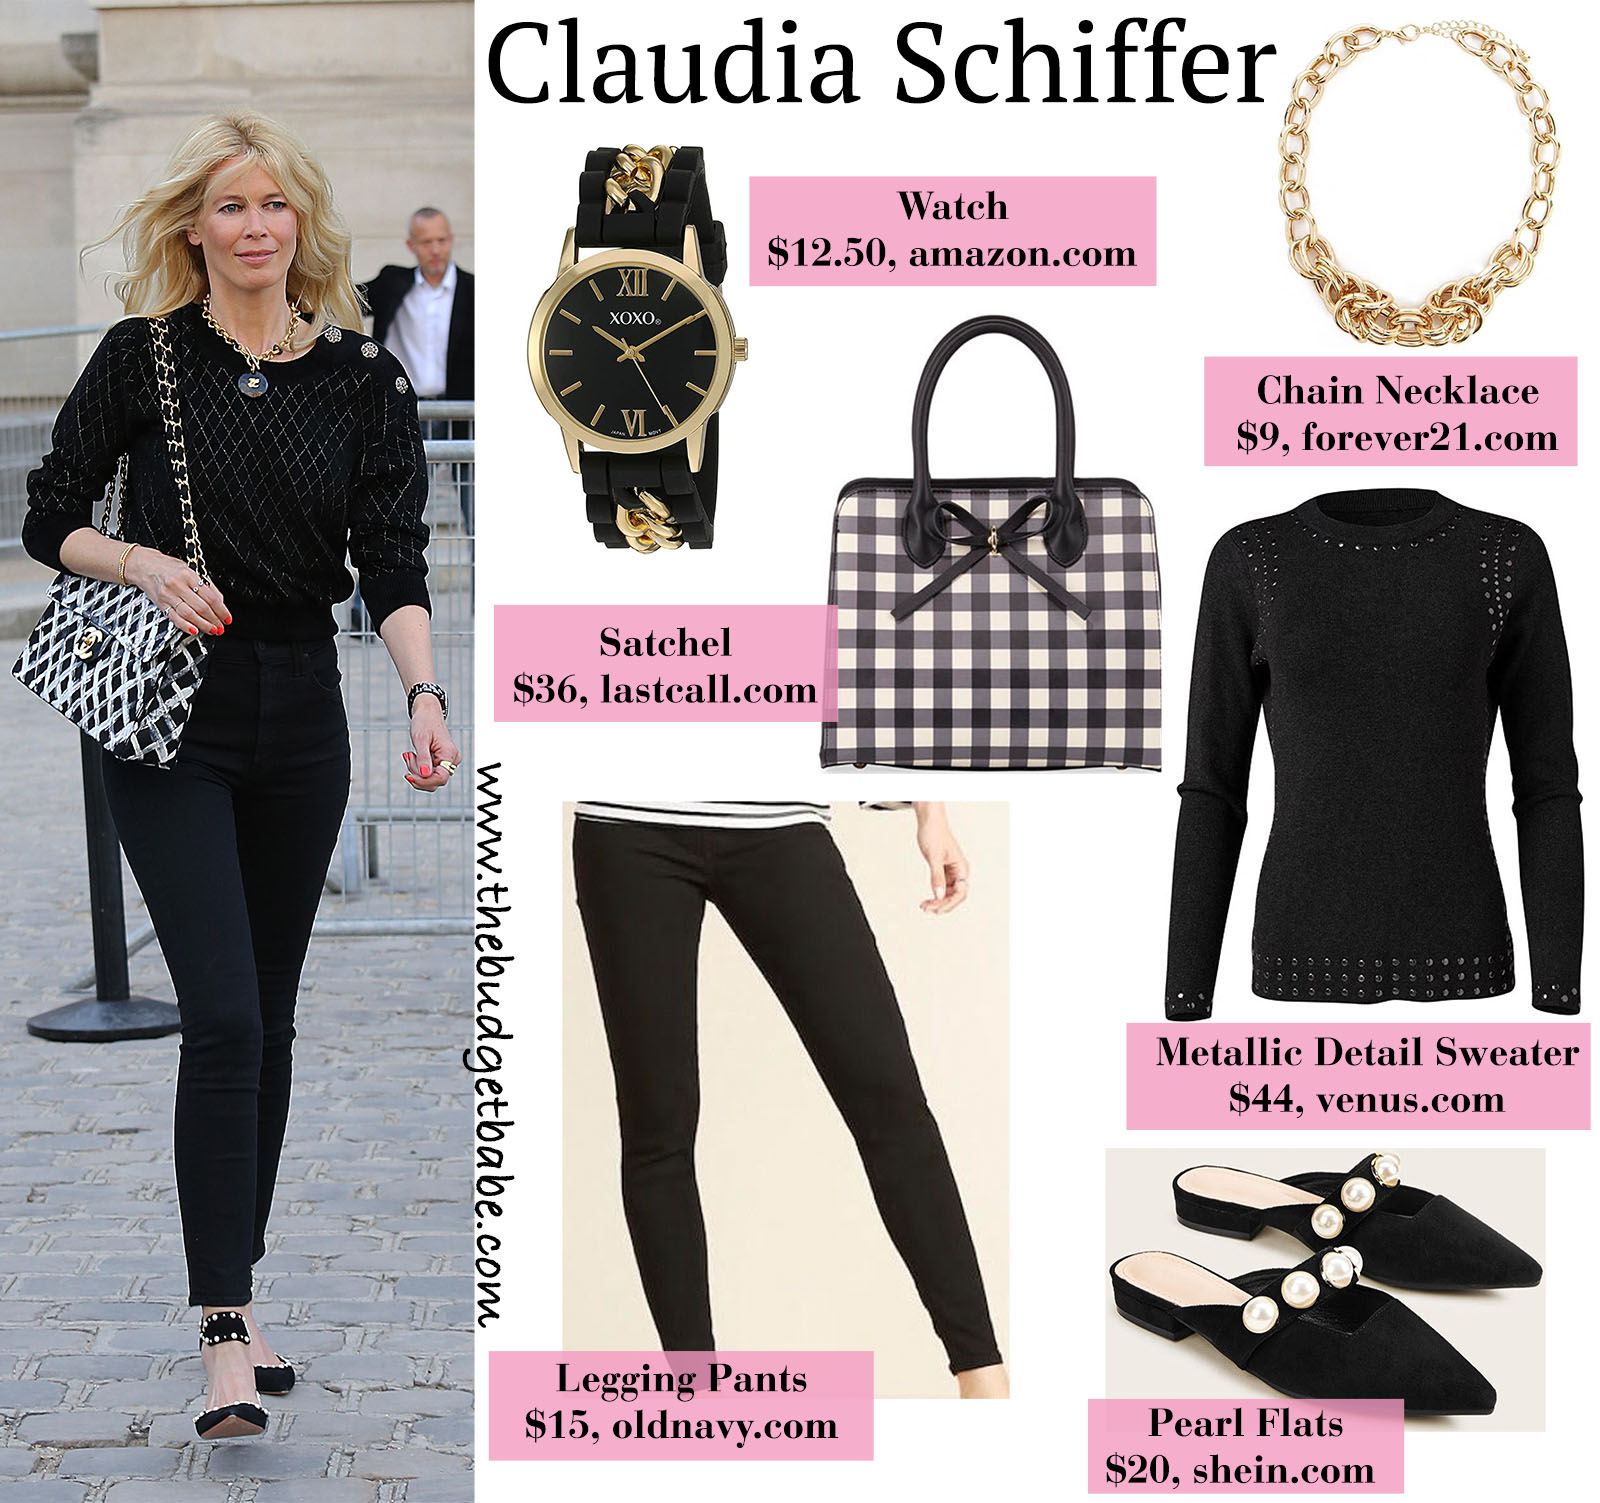 Claudia Schiffer stuns in Chanel accessories and all black outfit!